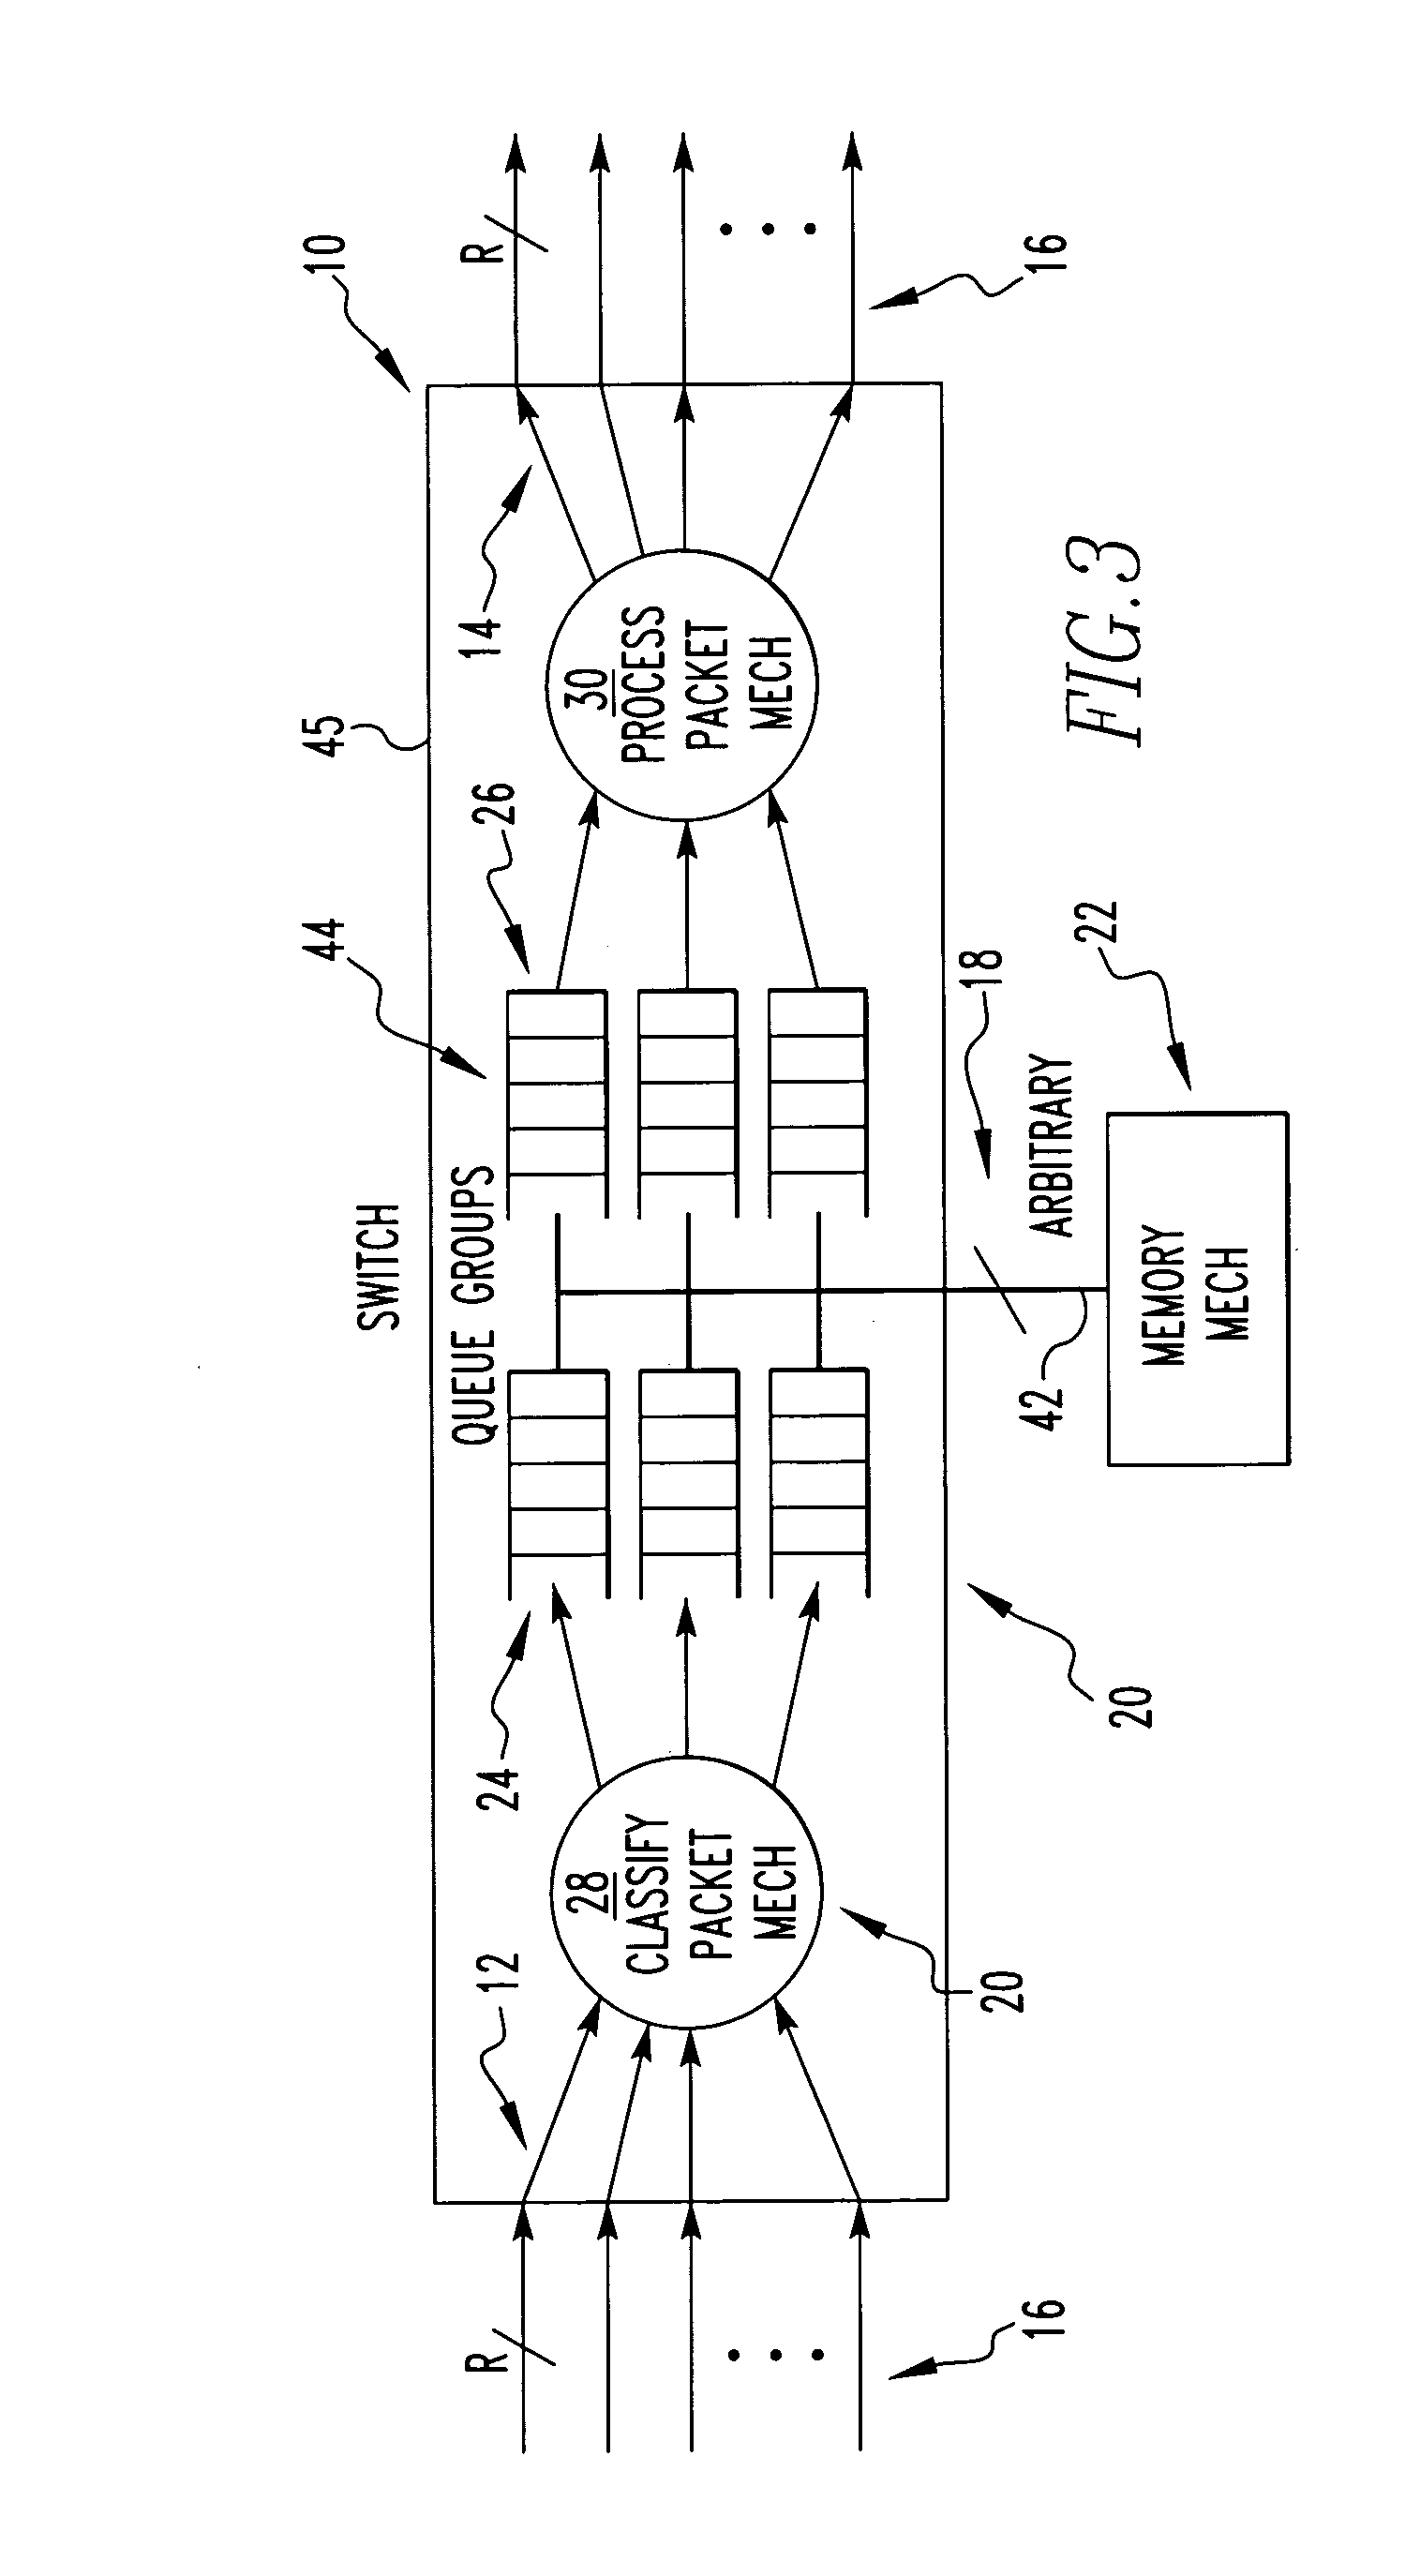 Very wide memory TDM switching system